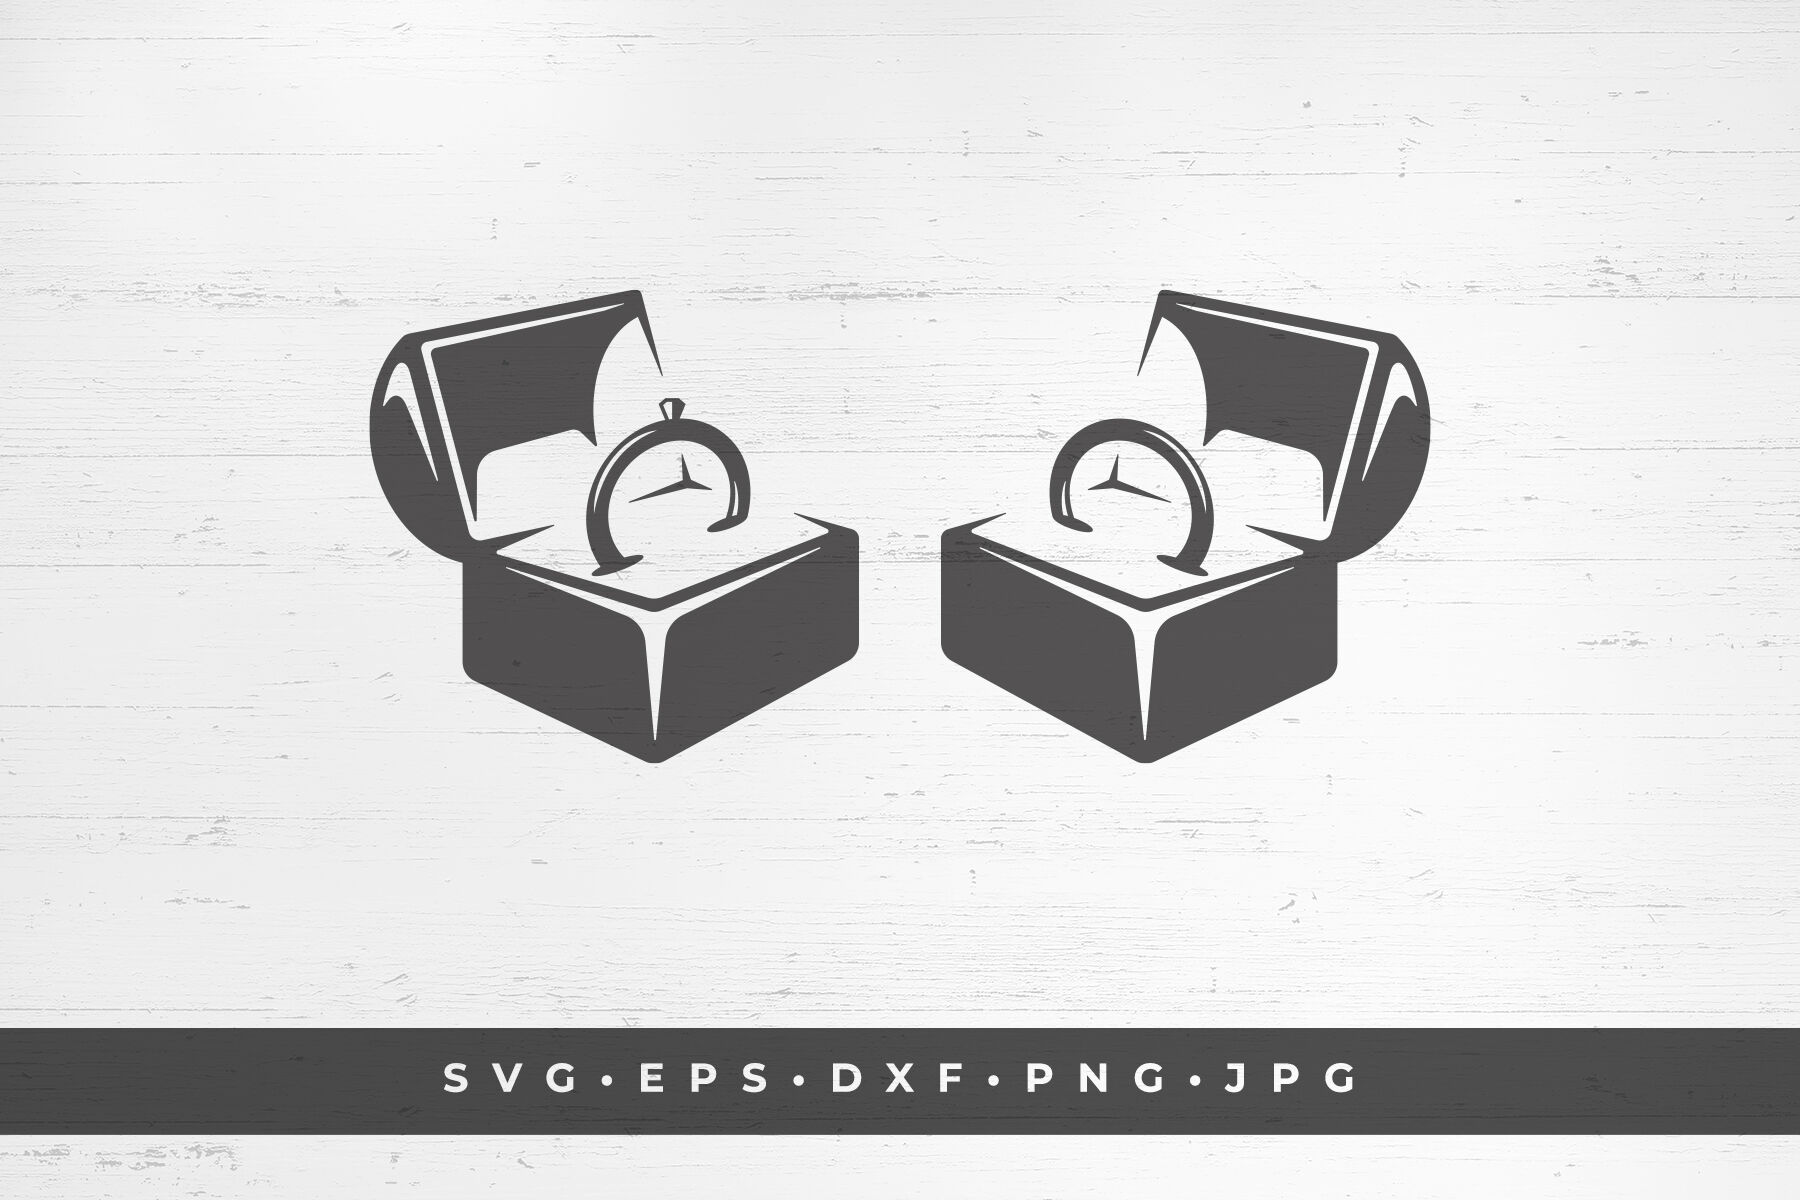 Wedding Ring Vector Outline Icon Design Illustration., Proposal,  Anniversary, Gift PNG Image Free Download And Clipart Image For Free  Download - Lovepik | 450178301